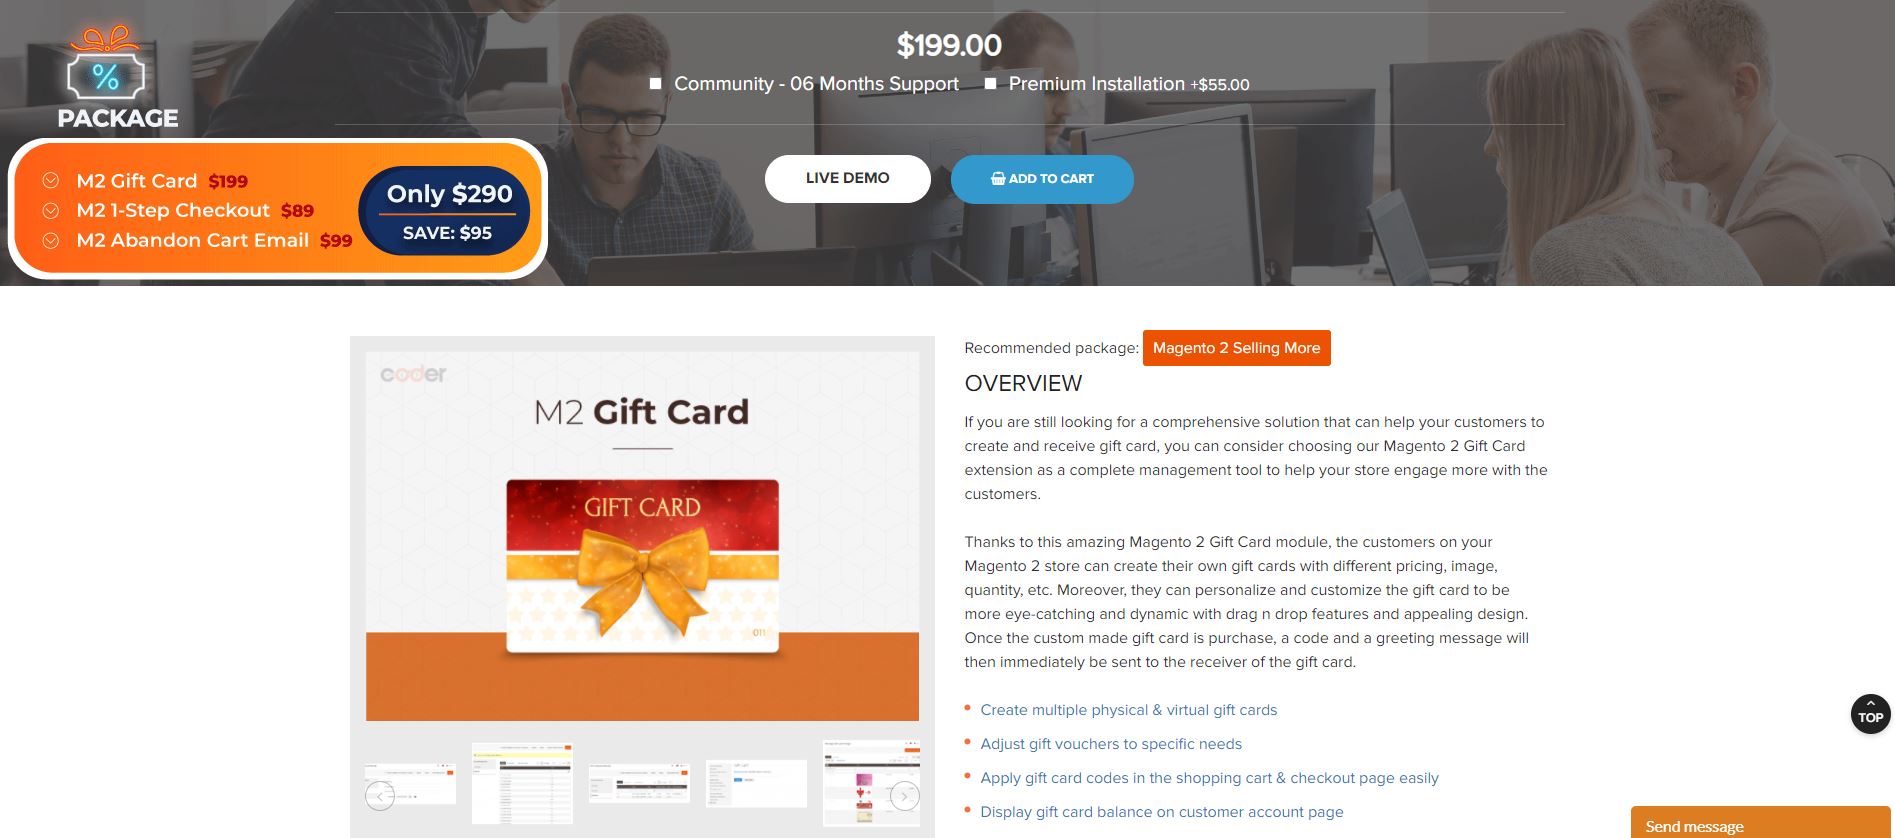 Magento gift card extension